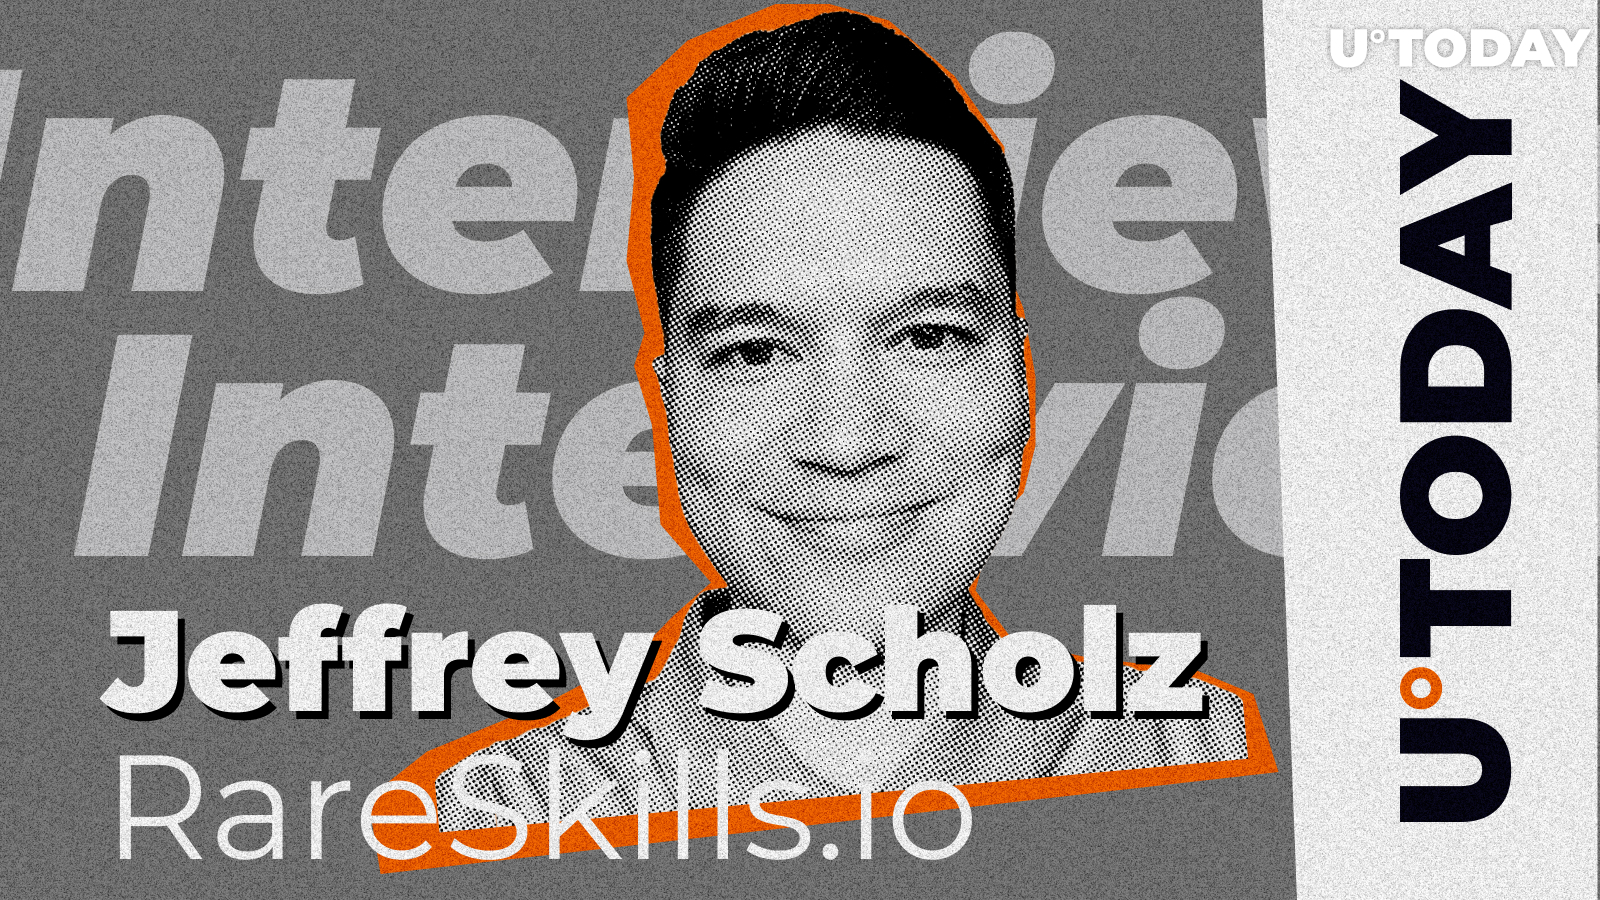 Challenges of Web3 Education, Solidity Engineers Training and First Free Guide on ZK Tech: Interview With RareSkills Founder Jeffrey Scholz